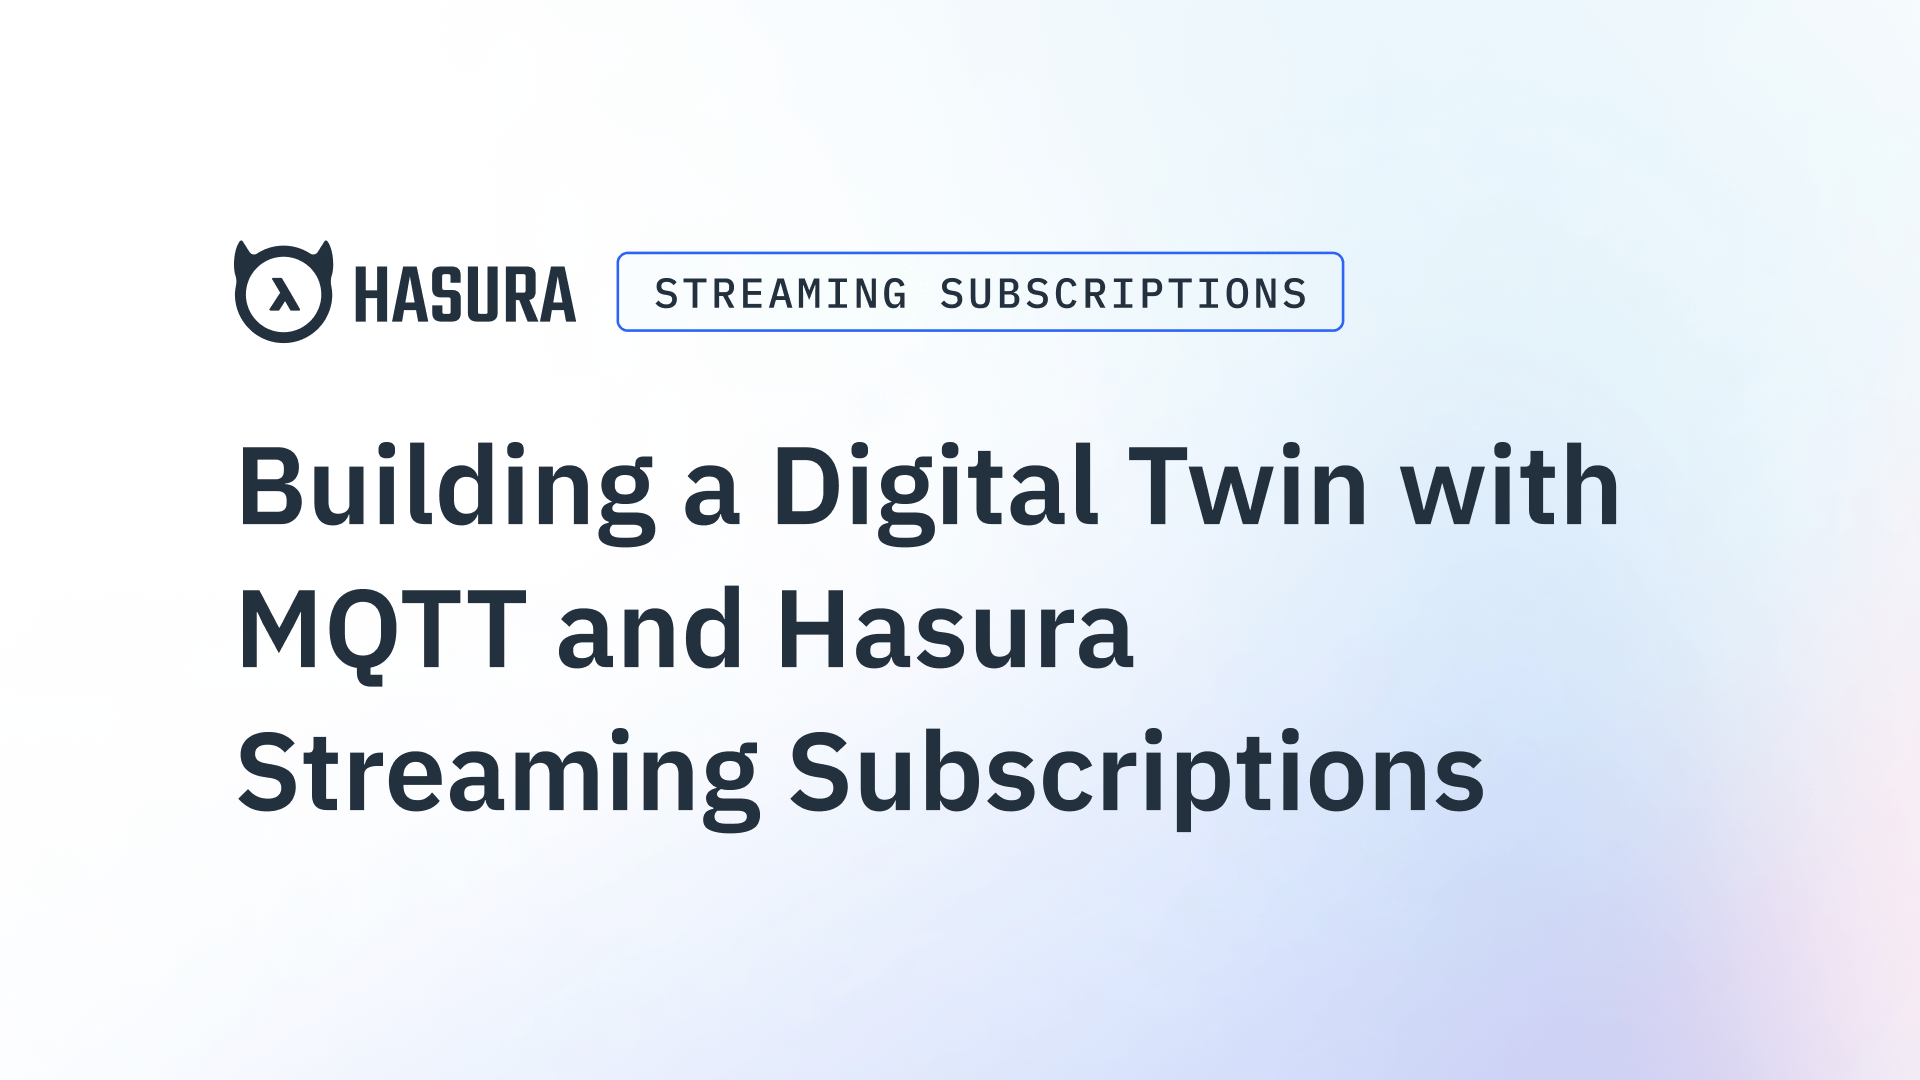 Building a Digital Twin with MQTT and Hasura Streaming Subscriptions